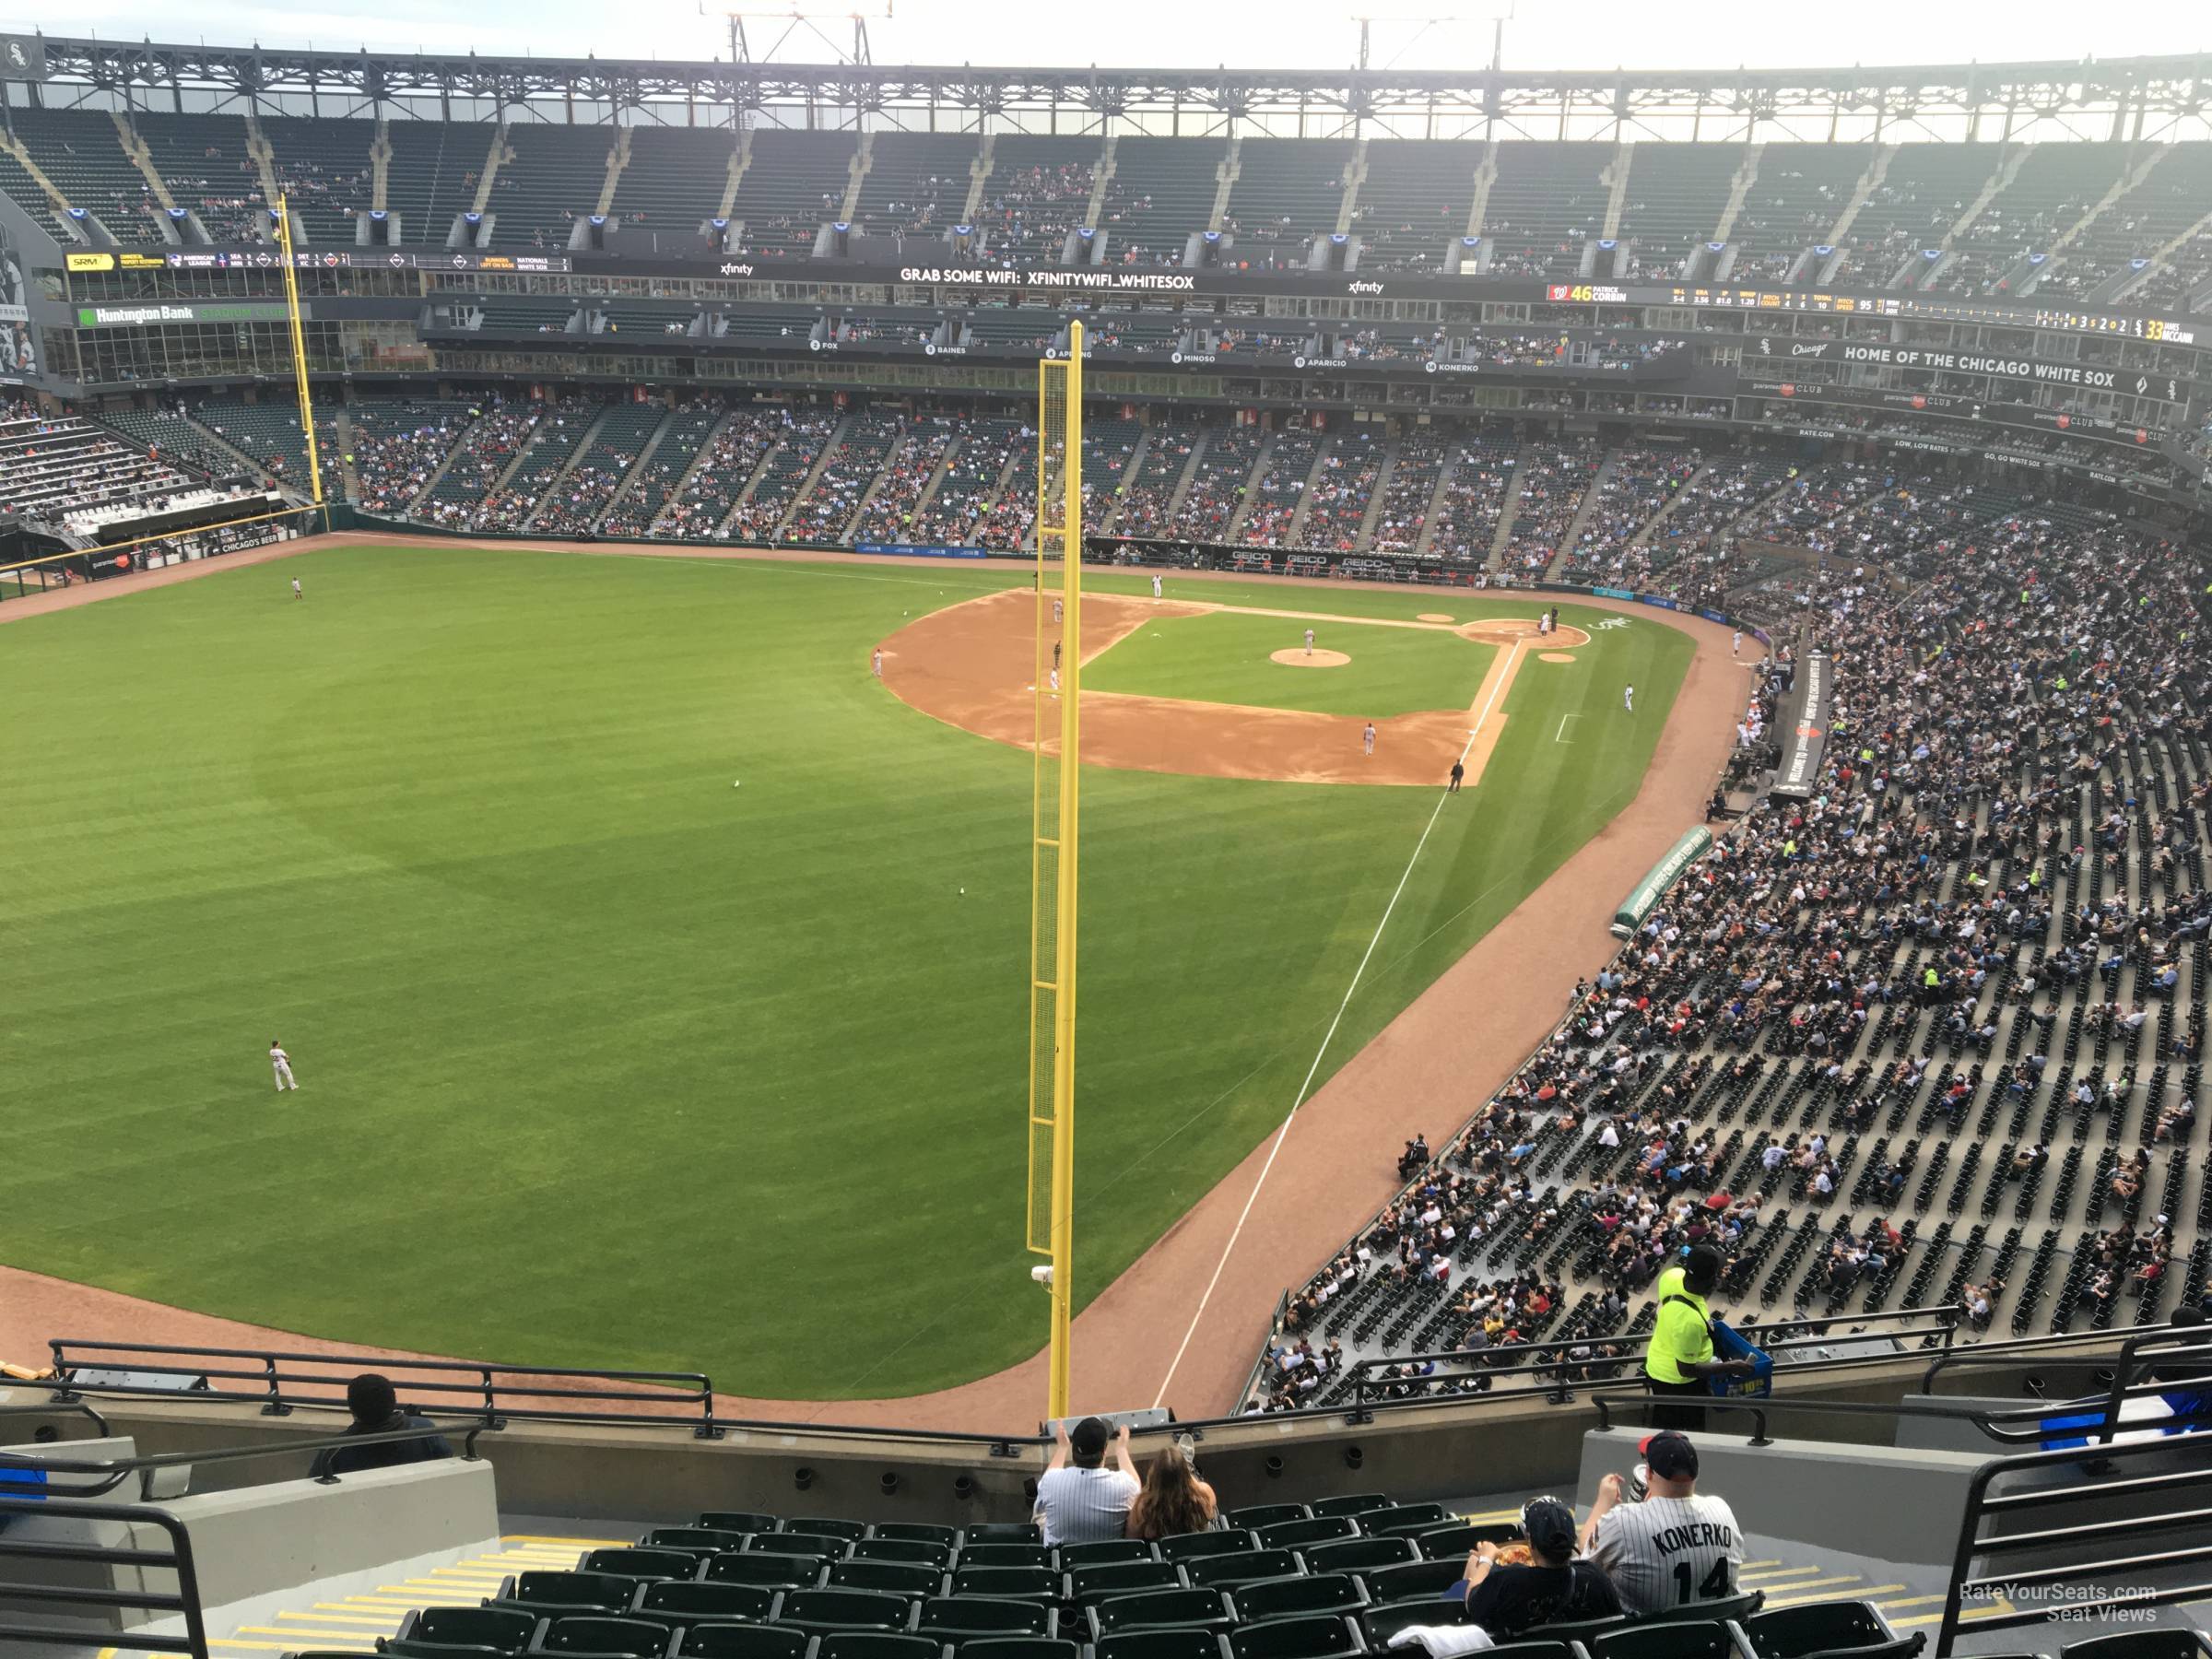 section 557, row 12 seat view  - guaranteed rate field